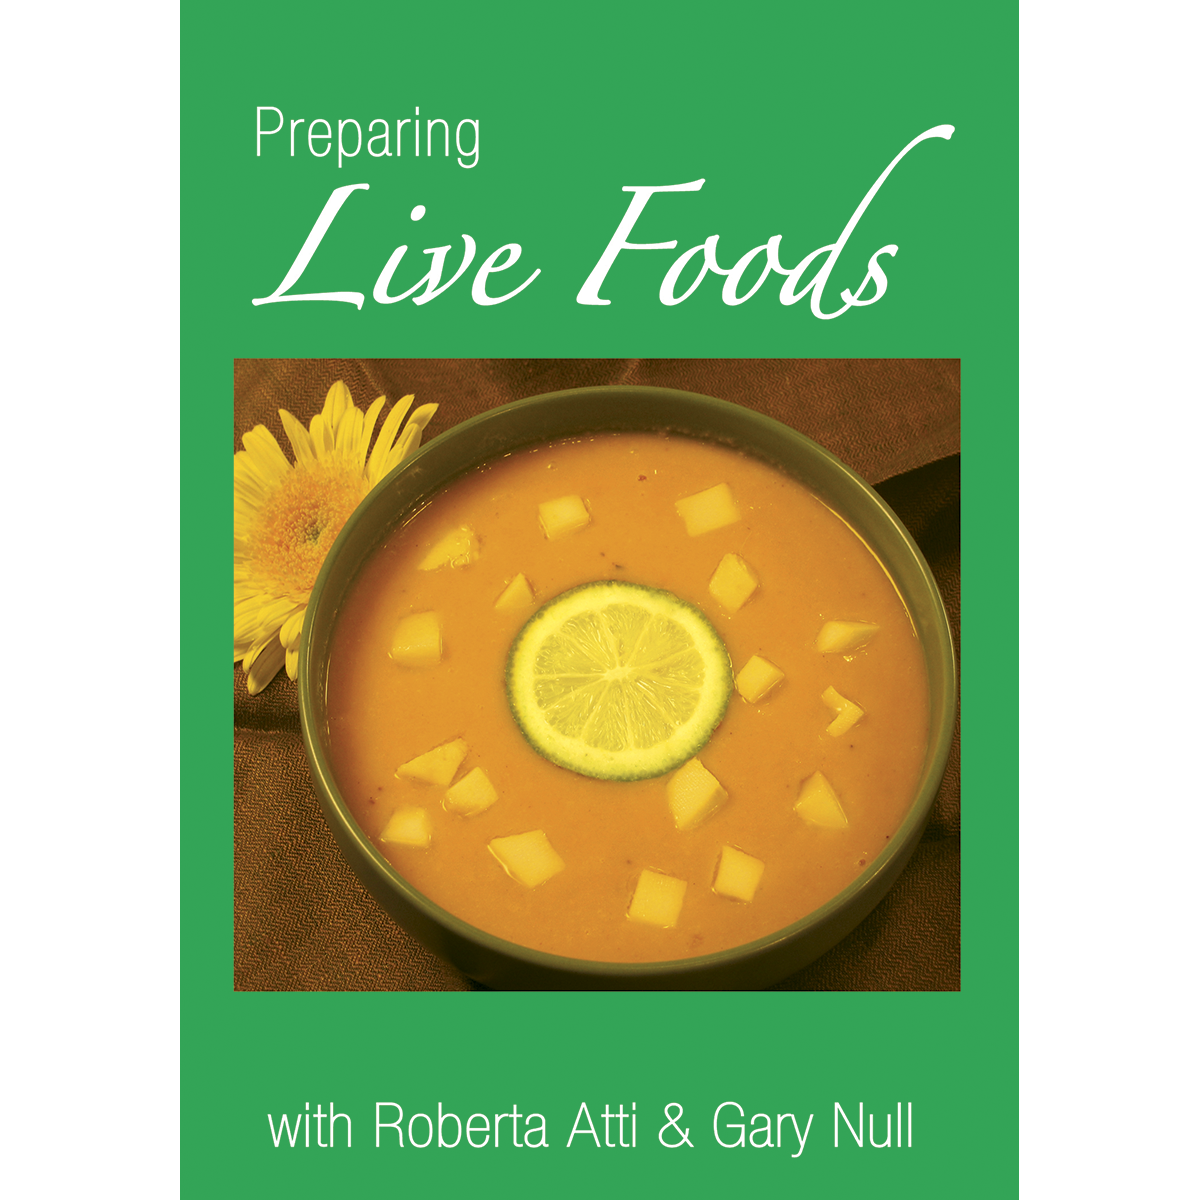 Prepairing-live-foods-Foods_7c661315-69f6-4662-b8be-9590cce4cacb.png